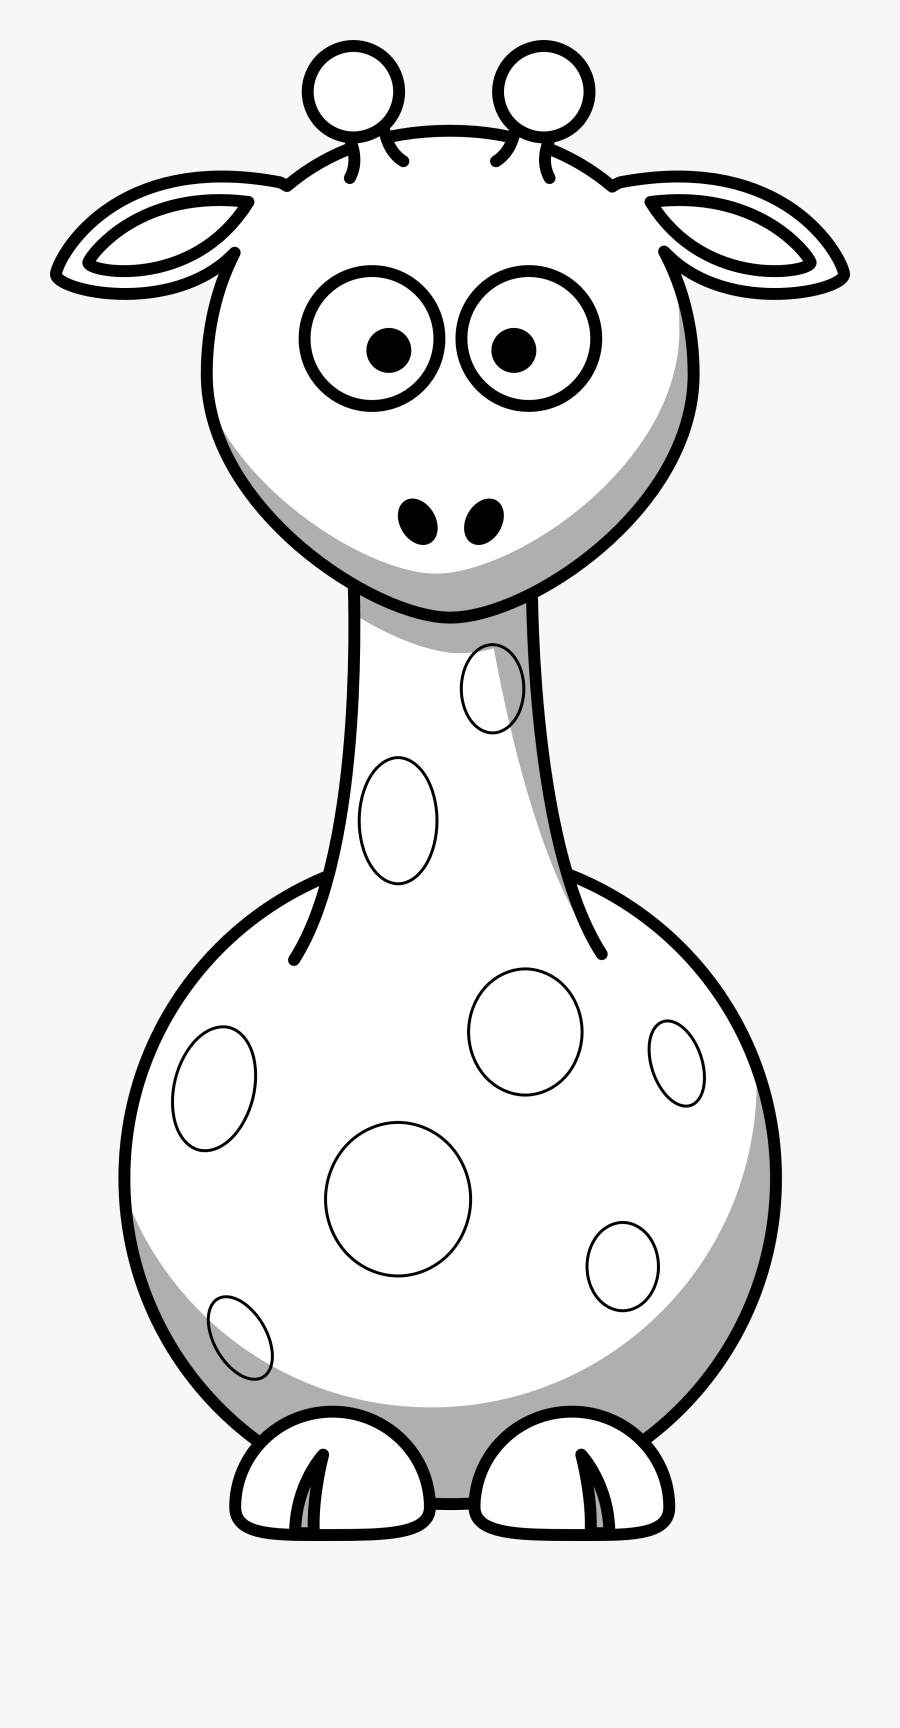 Giraffe Clipart Black And White Free Images - Black And White Animal Clipart Cute, Transparent Clipart